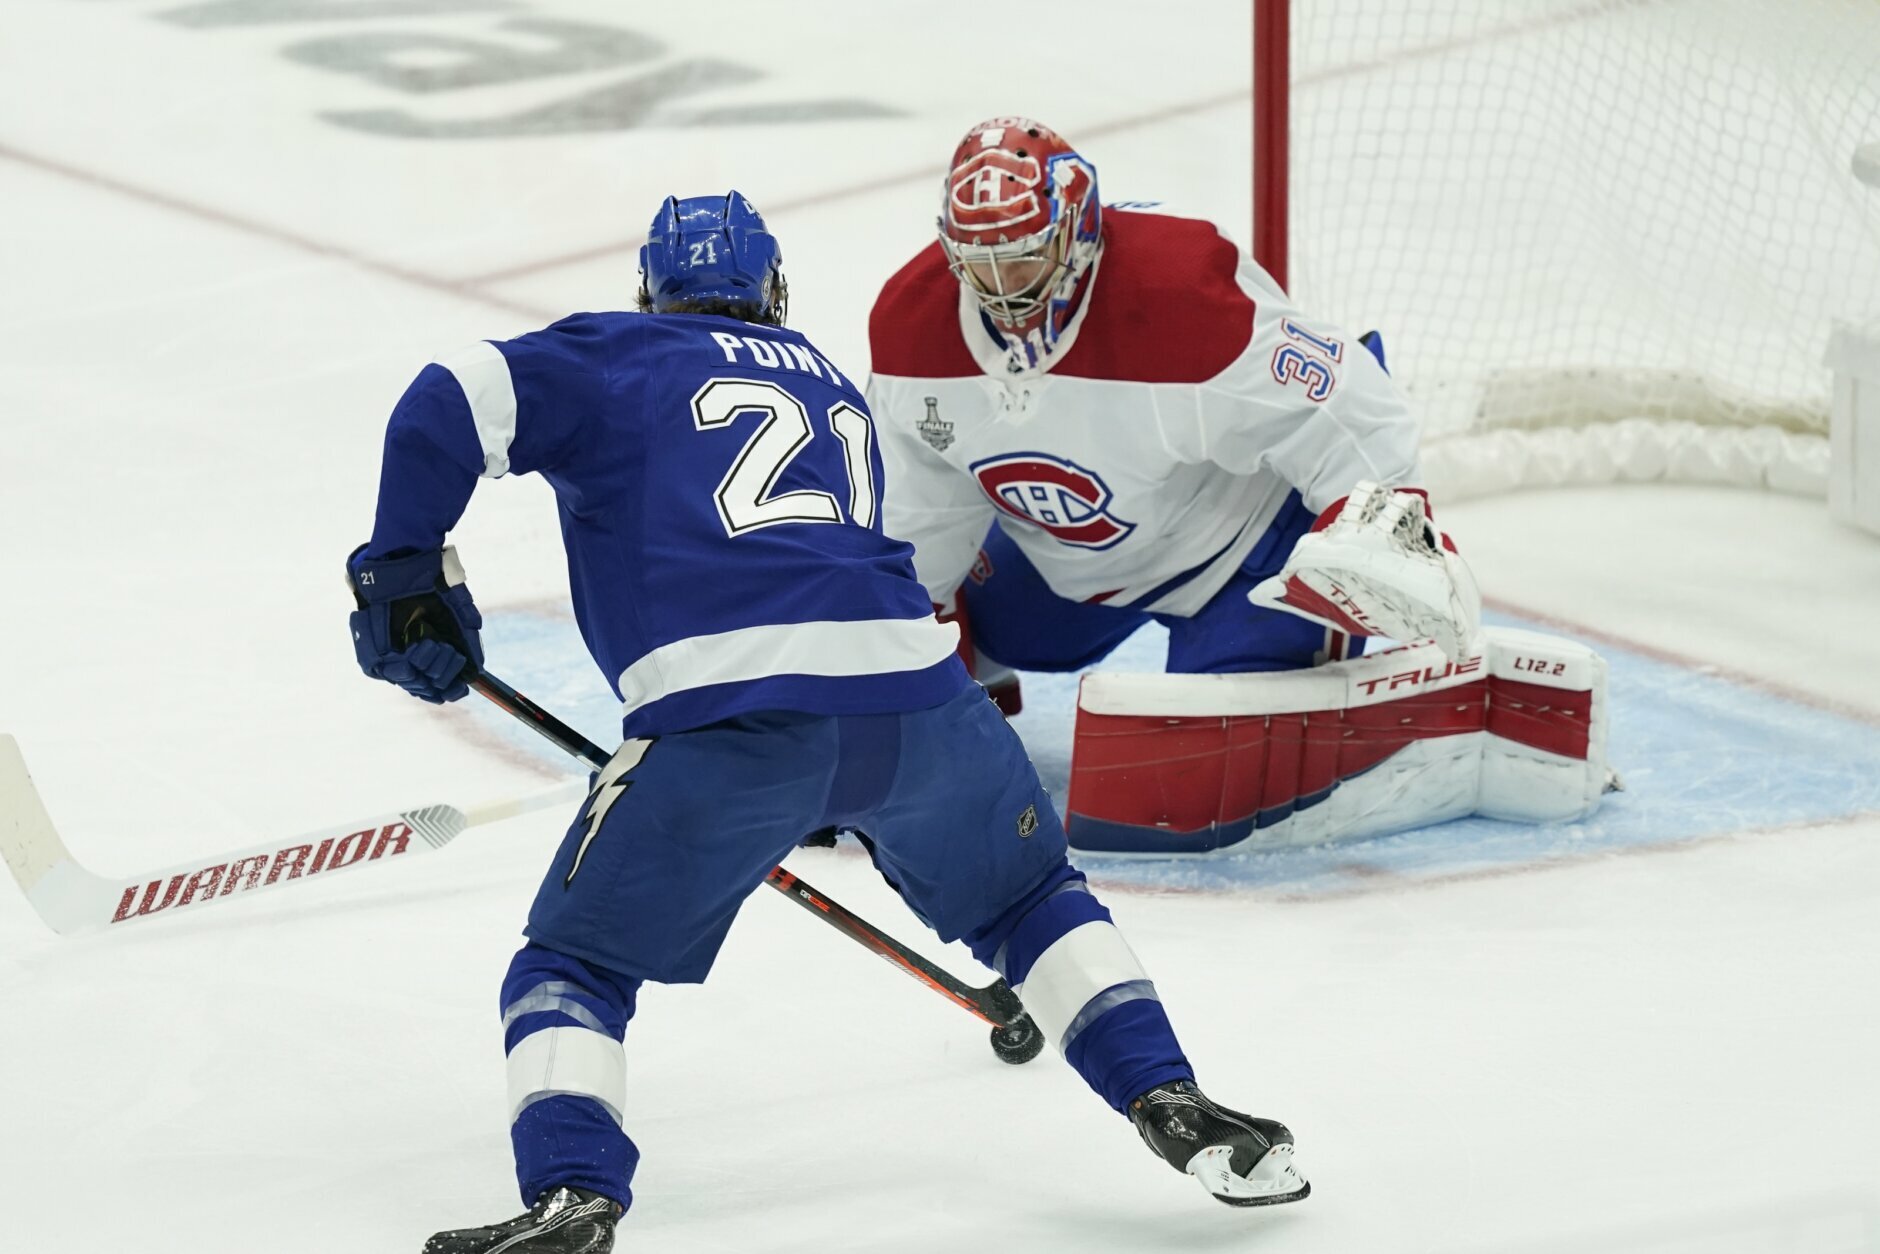 Victor Hedman's scoring surge a key to Lightning's Stanley Cup chase